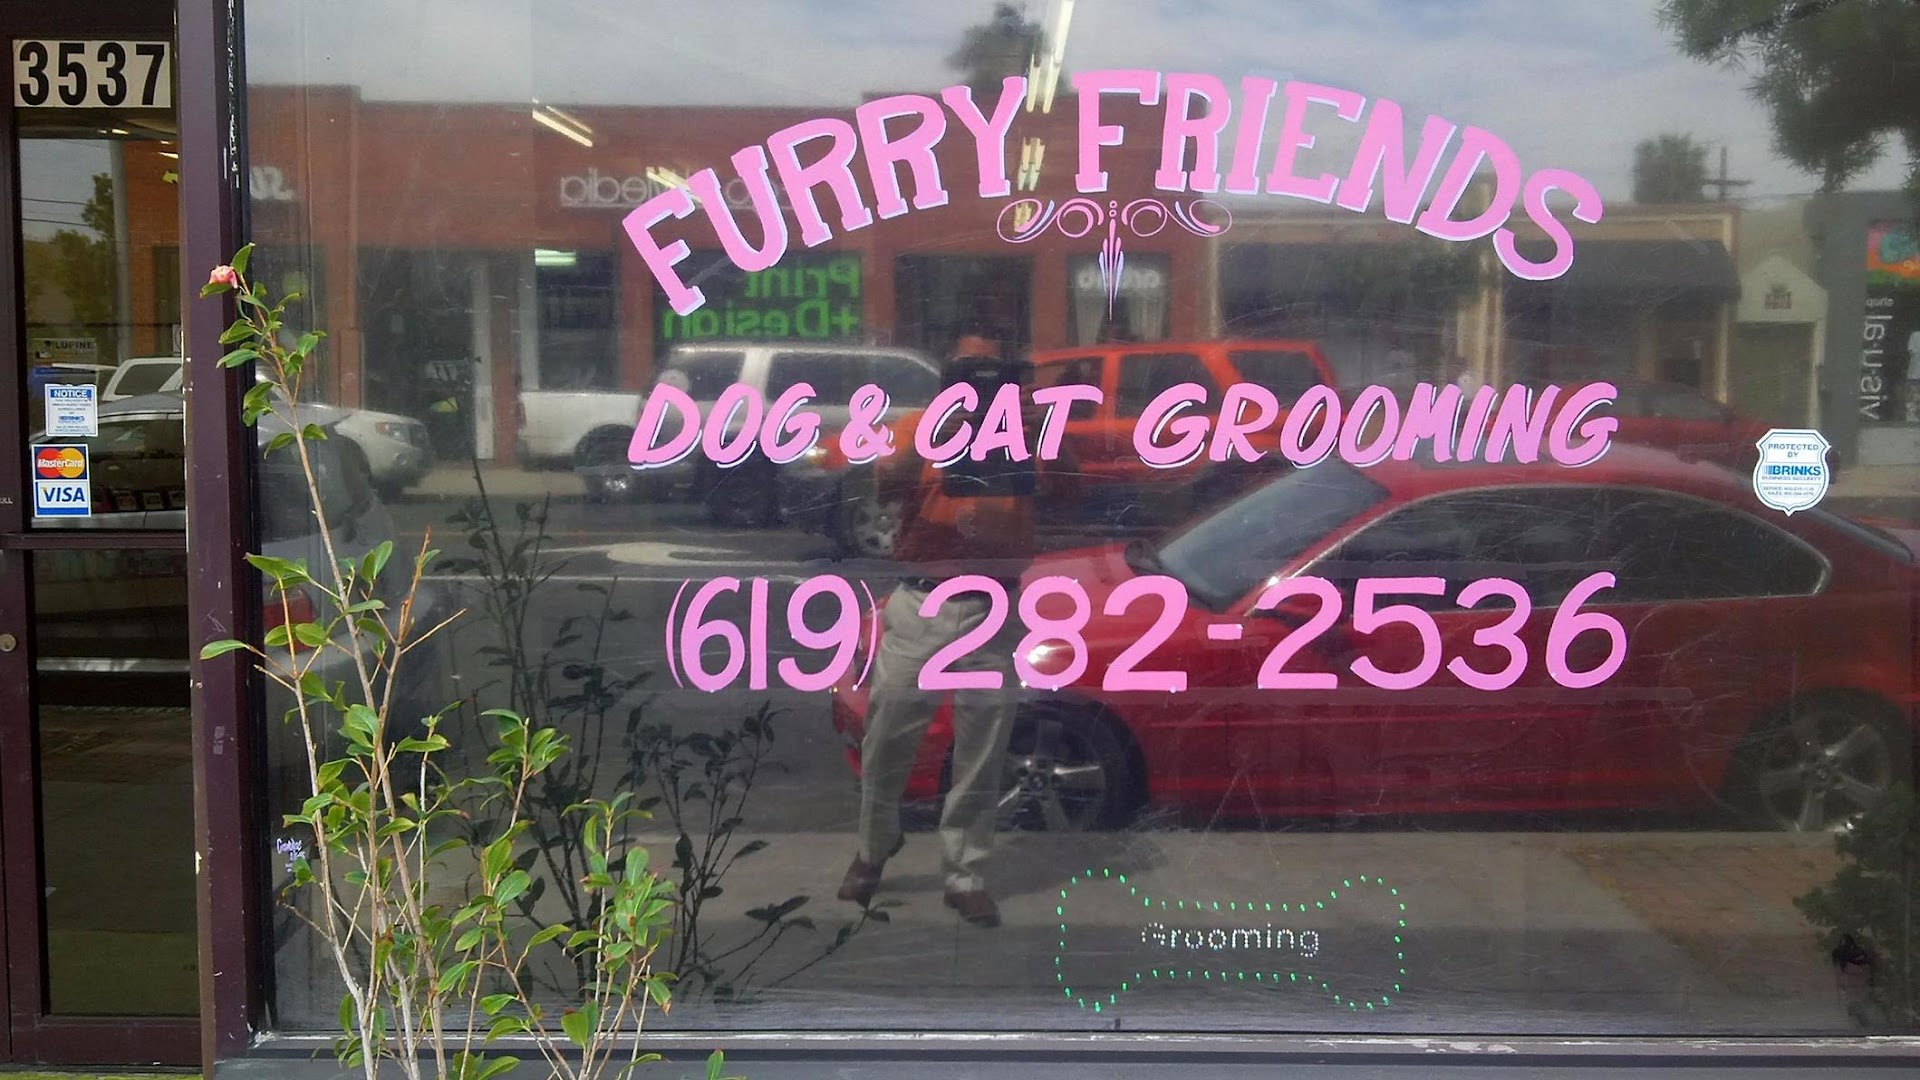 Furry Friends Dog and Cat Grooming